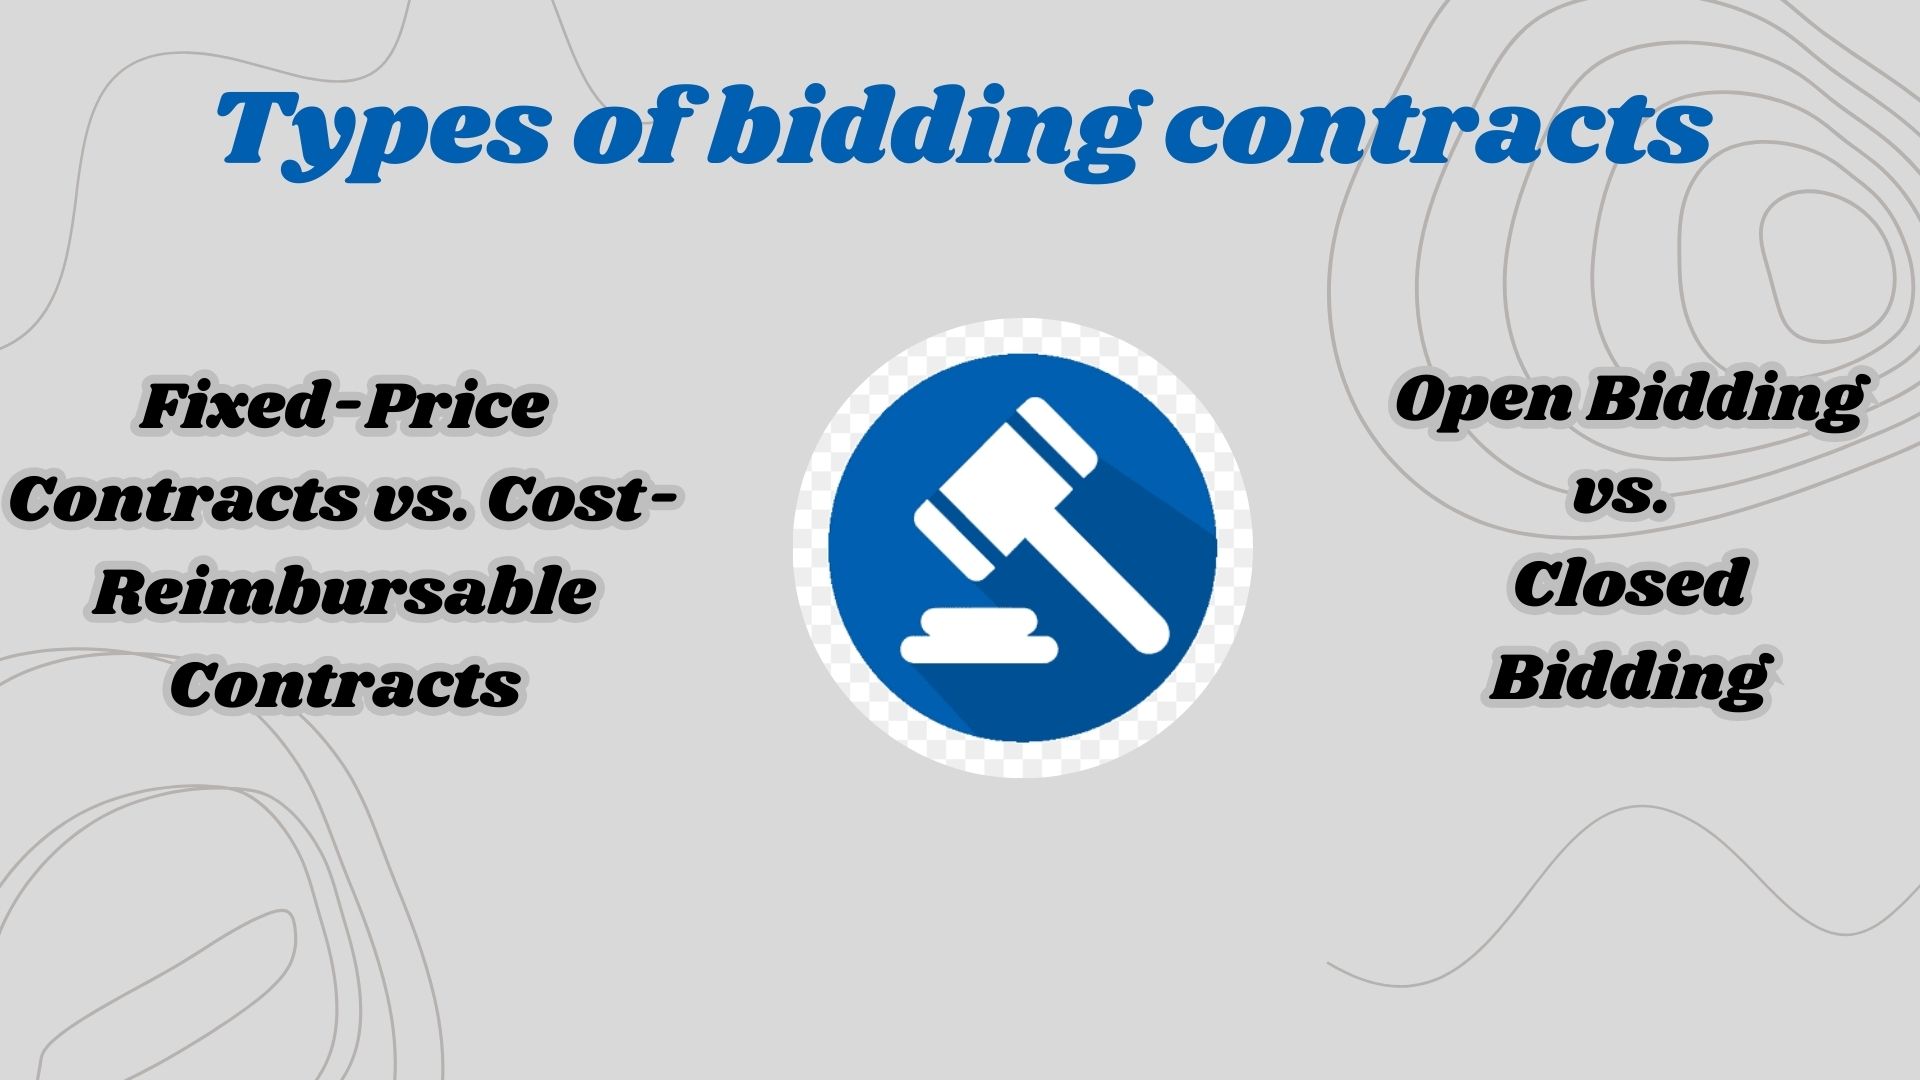 Types of bidding contracts